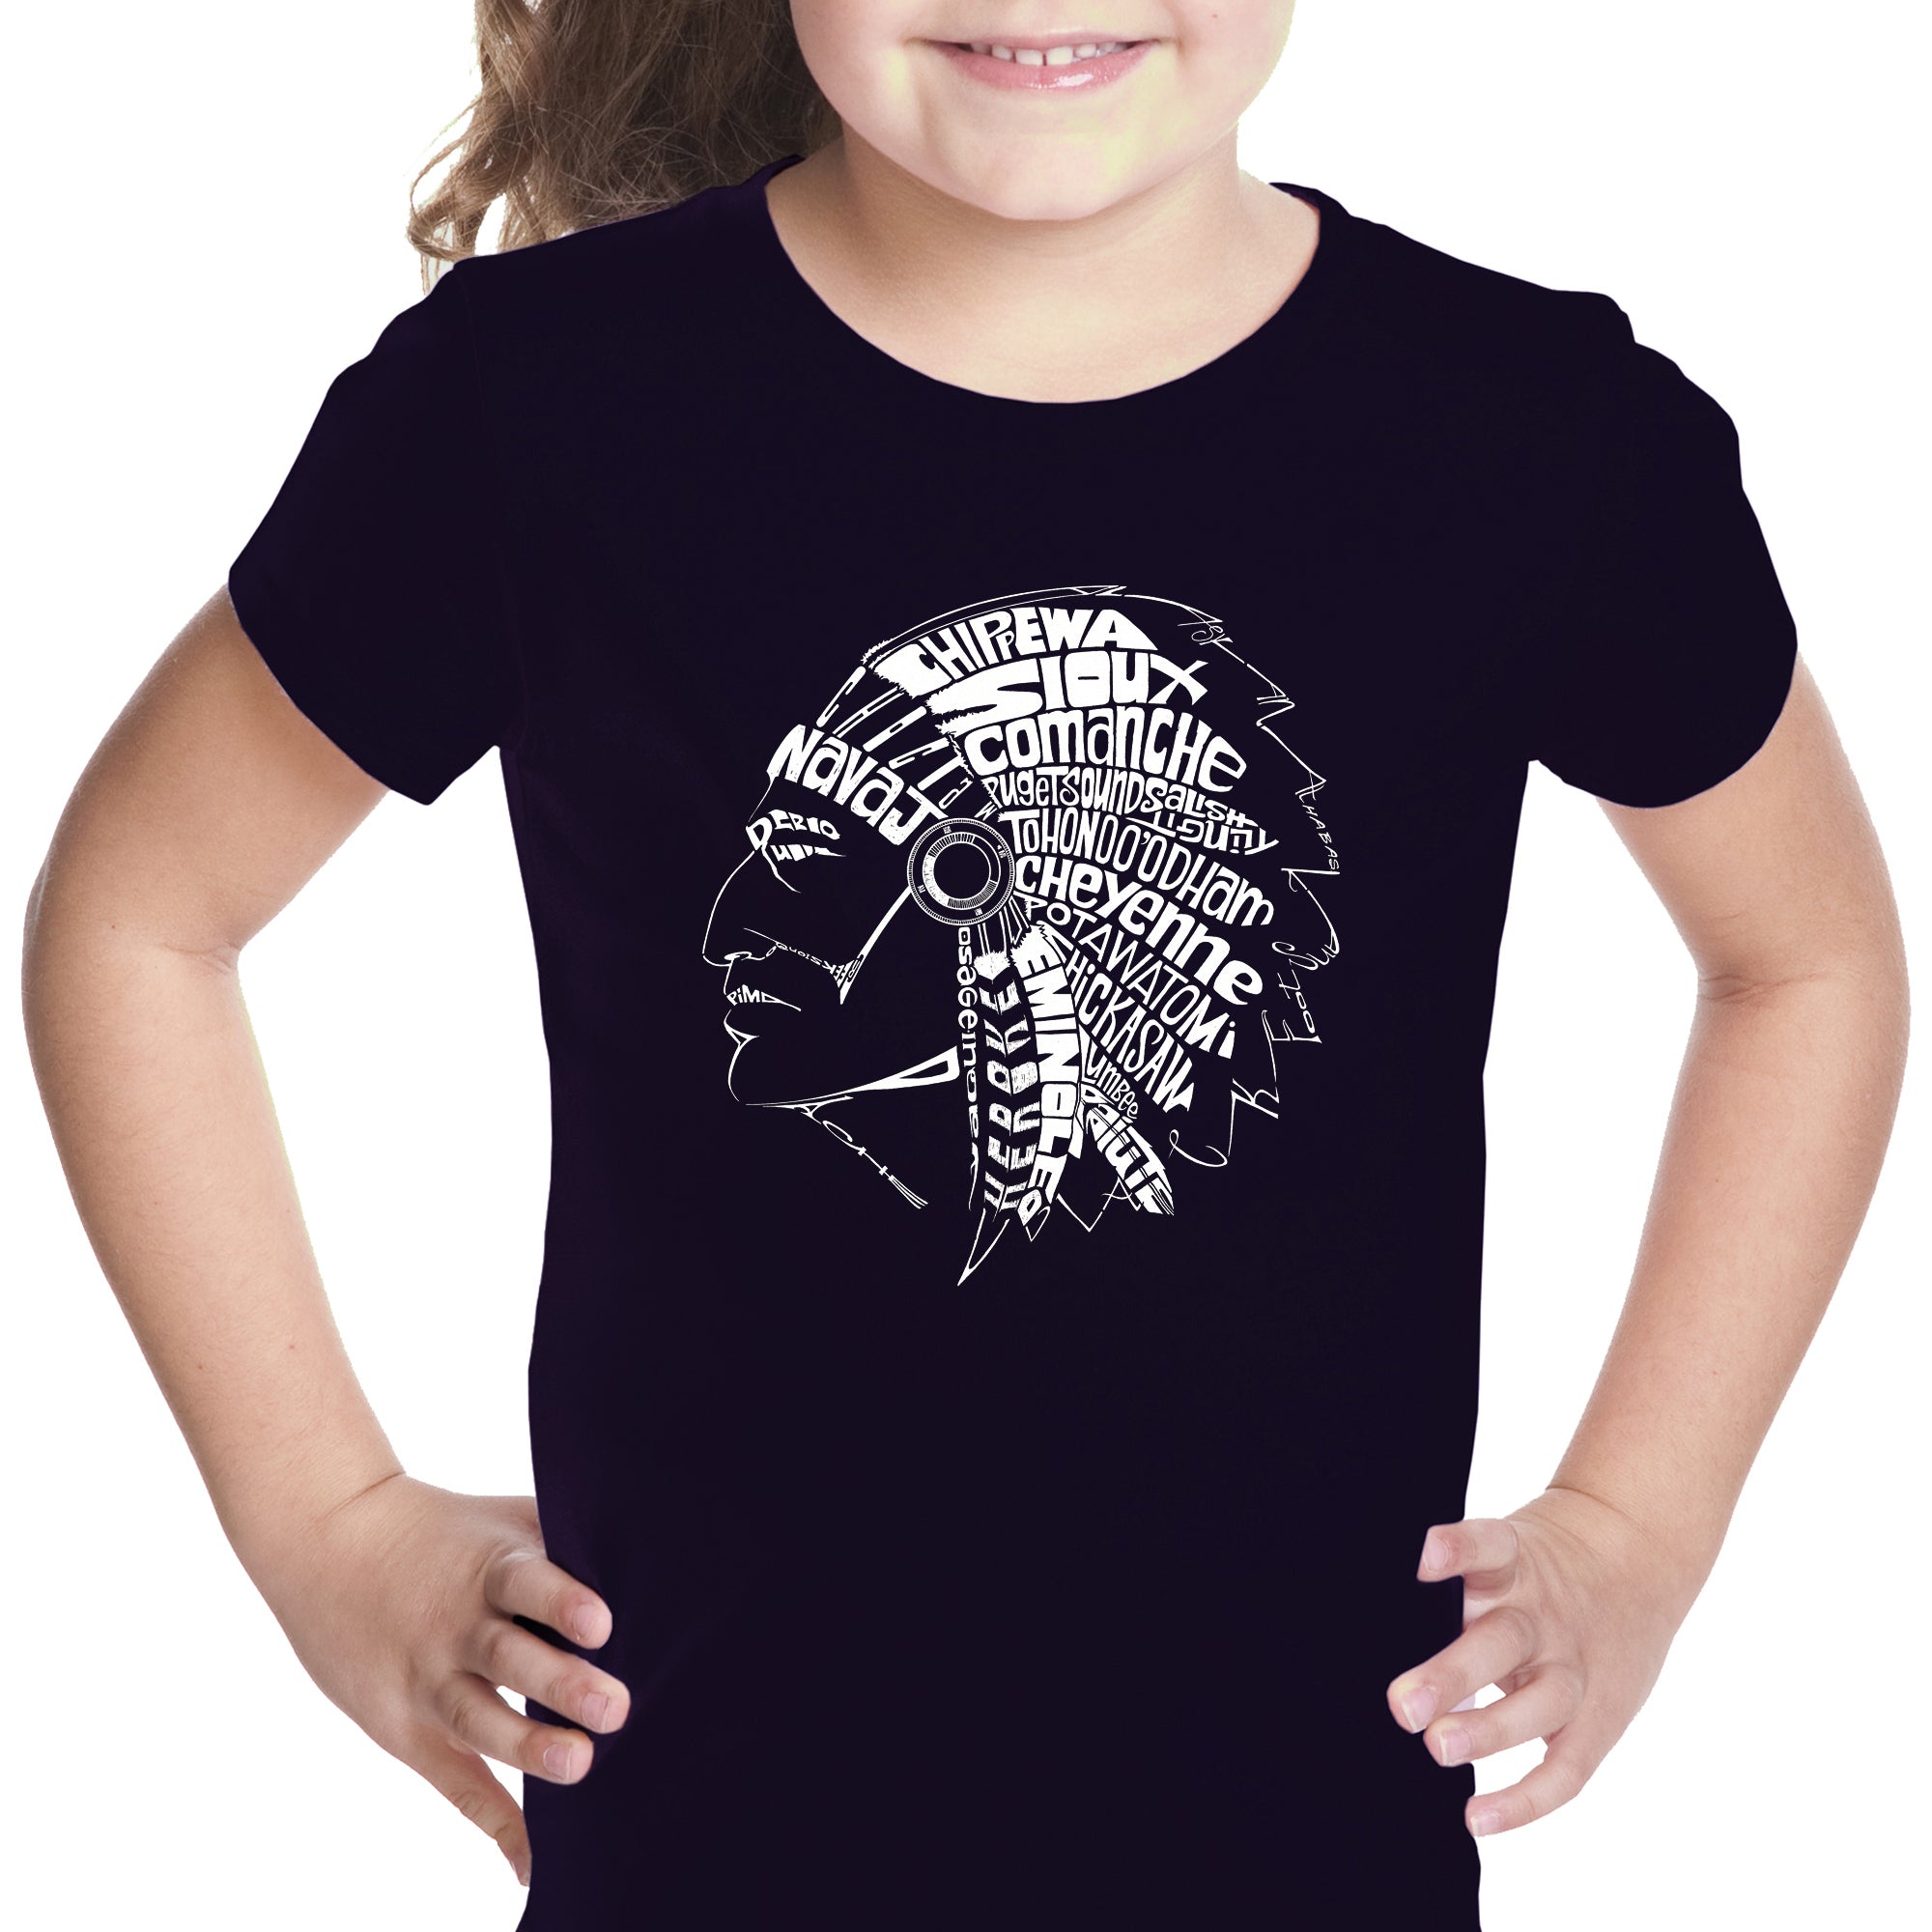 Popular Native American Indian Tribes - Girl's Word Art T-Shirt Large / Black